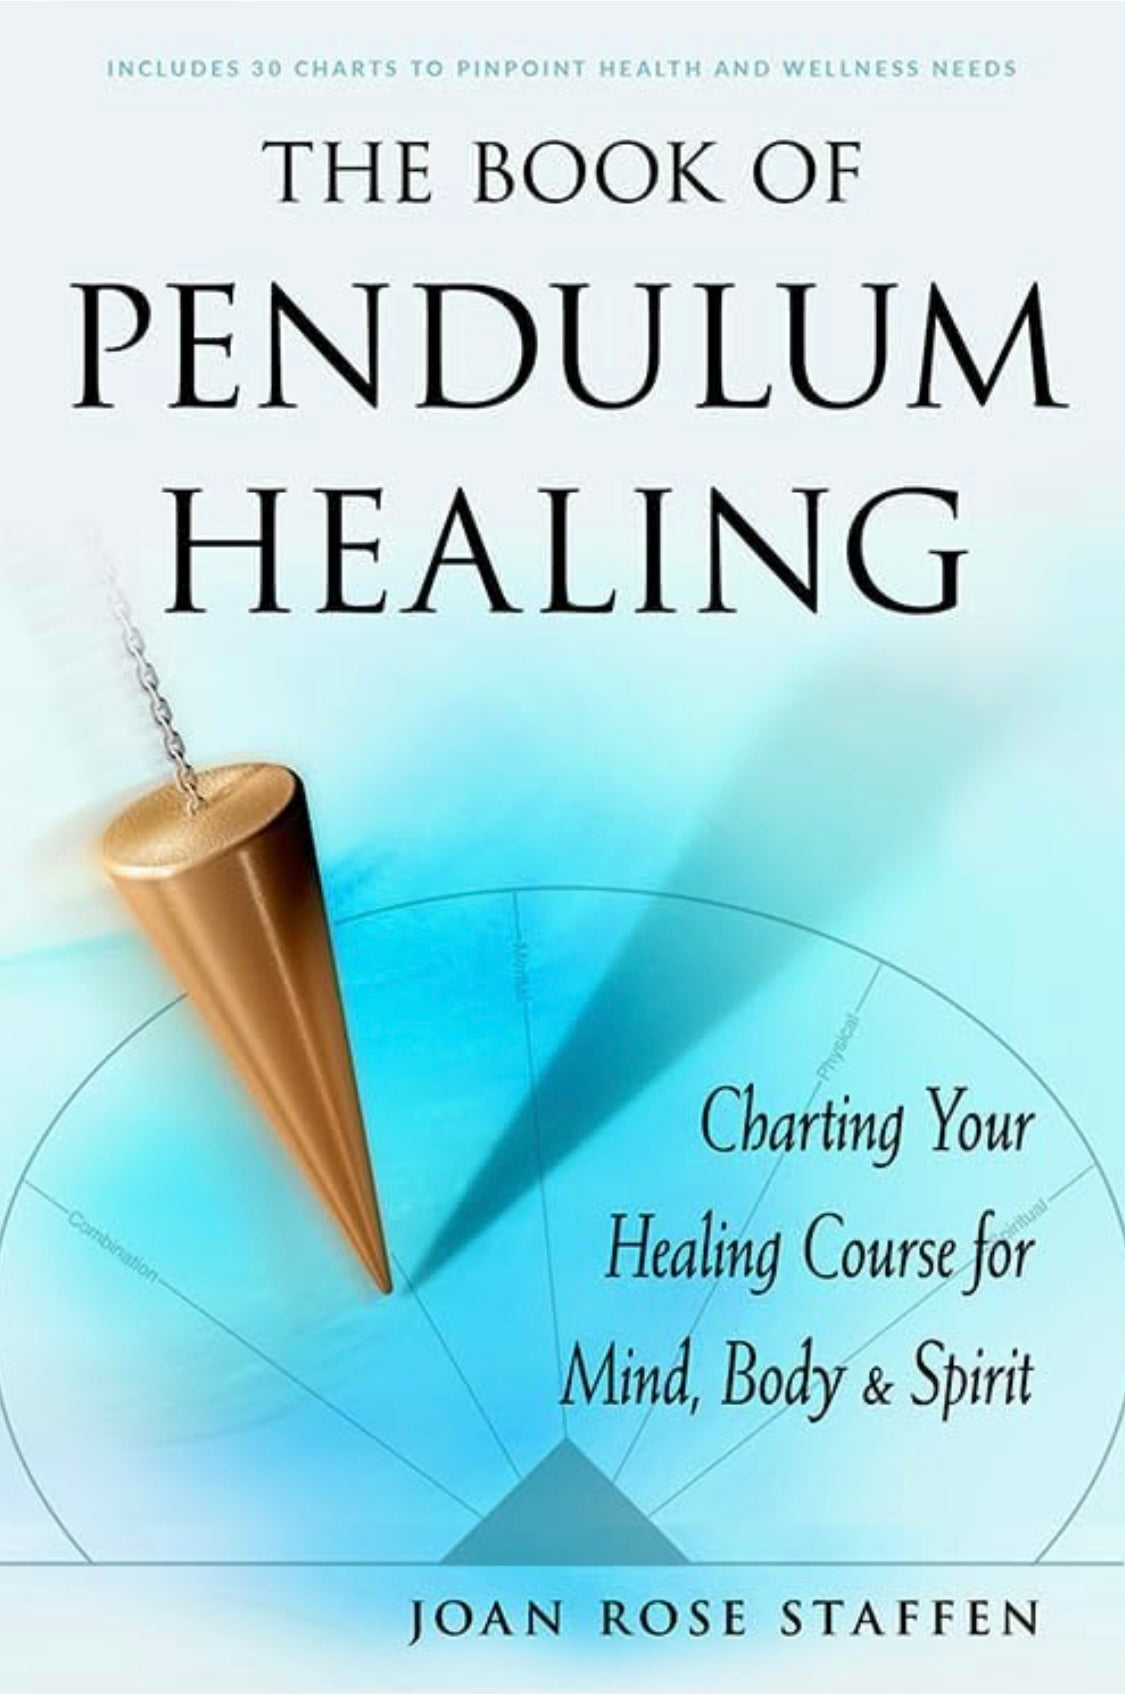 The Book of Pendulum Healing: Charting Your Healing Course for Mind, Body, & Spirit by Joan Rose Steffen